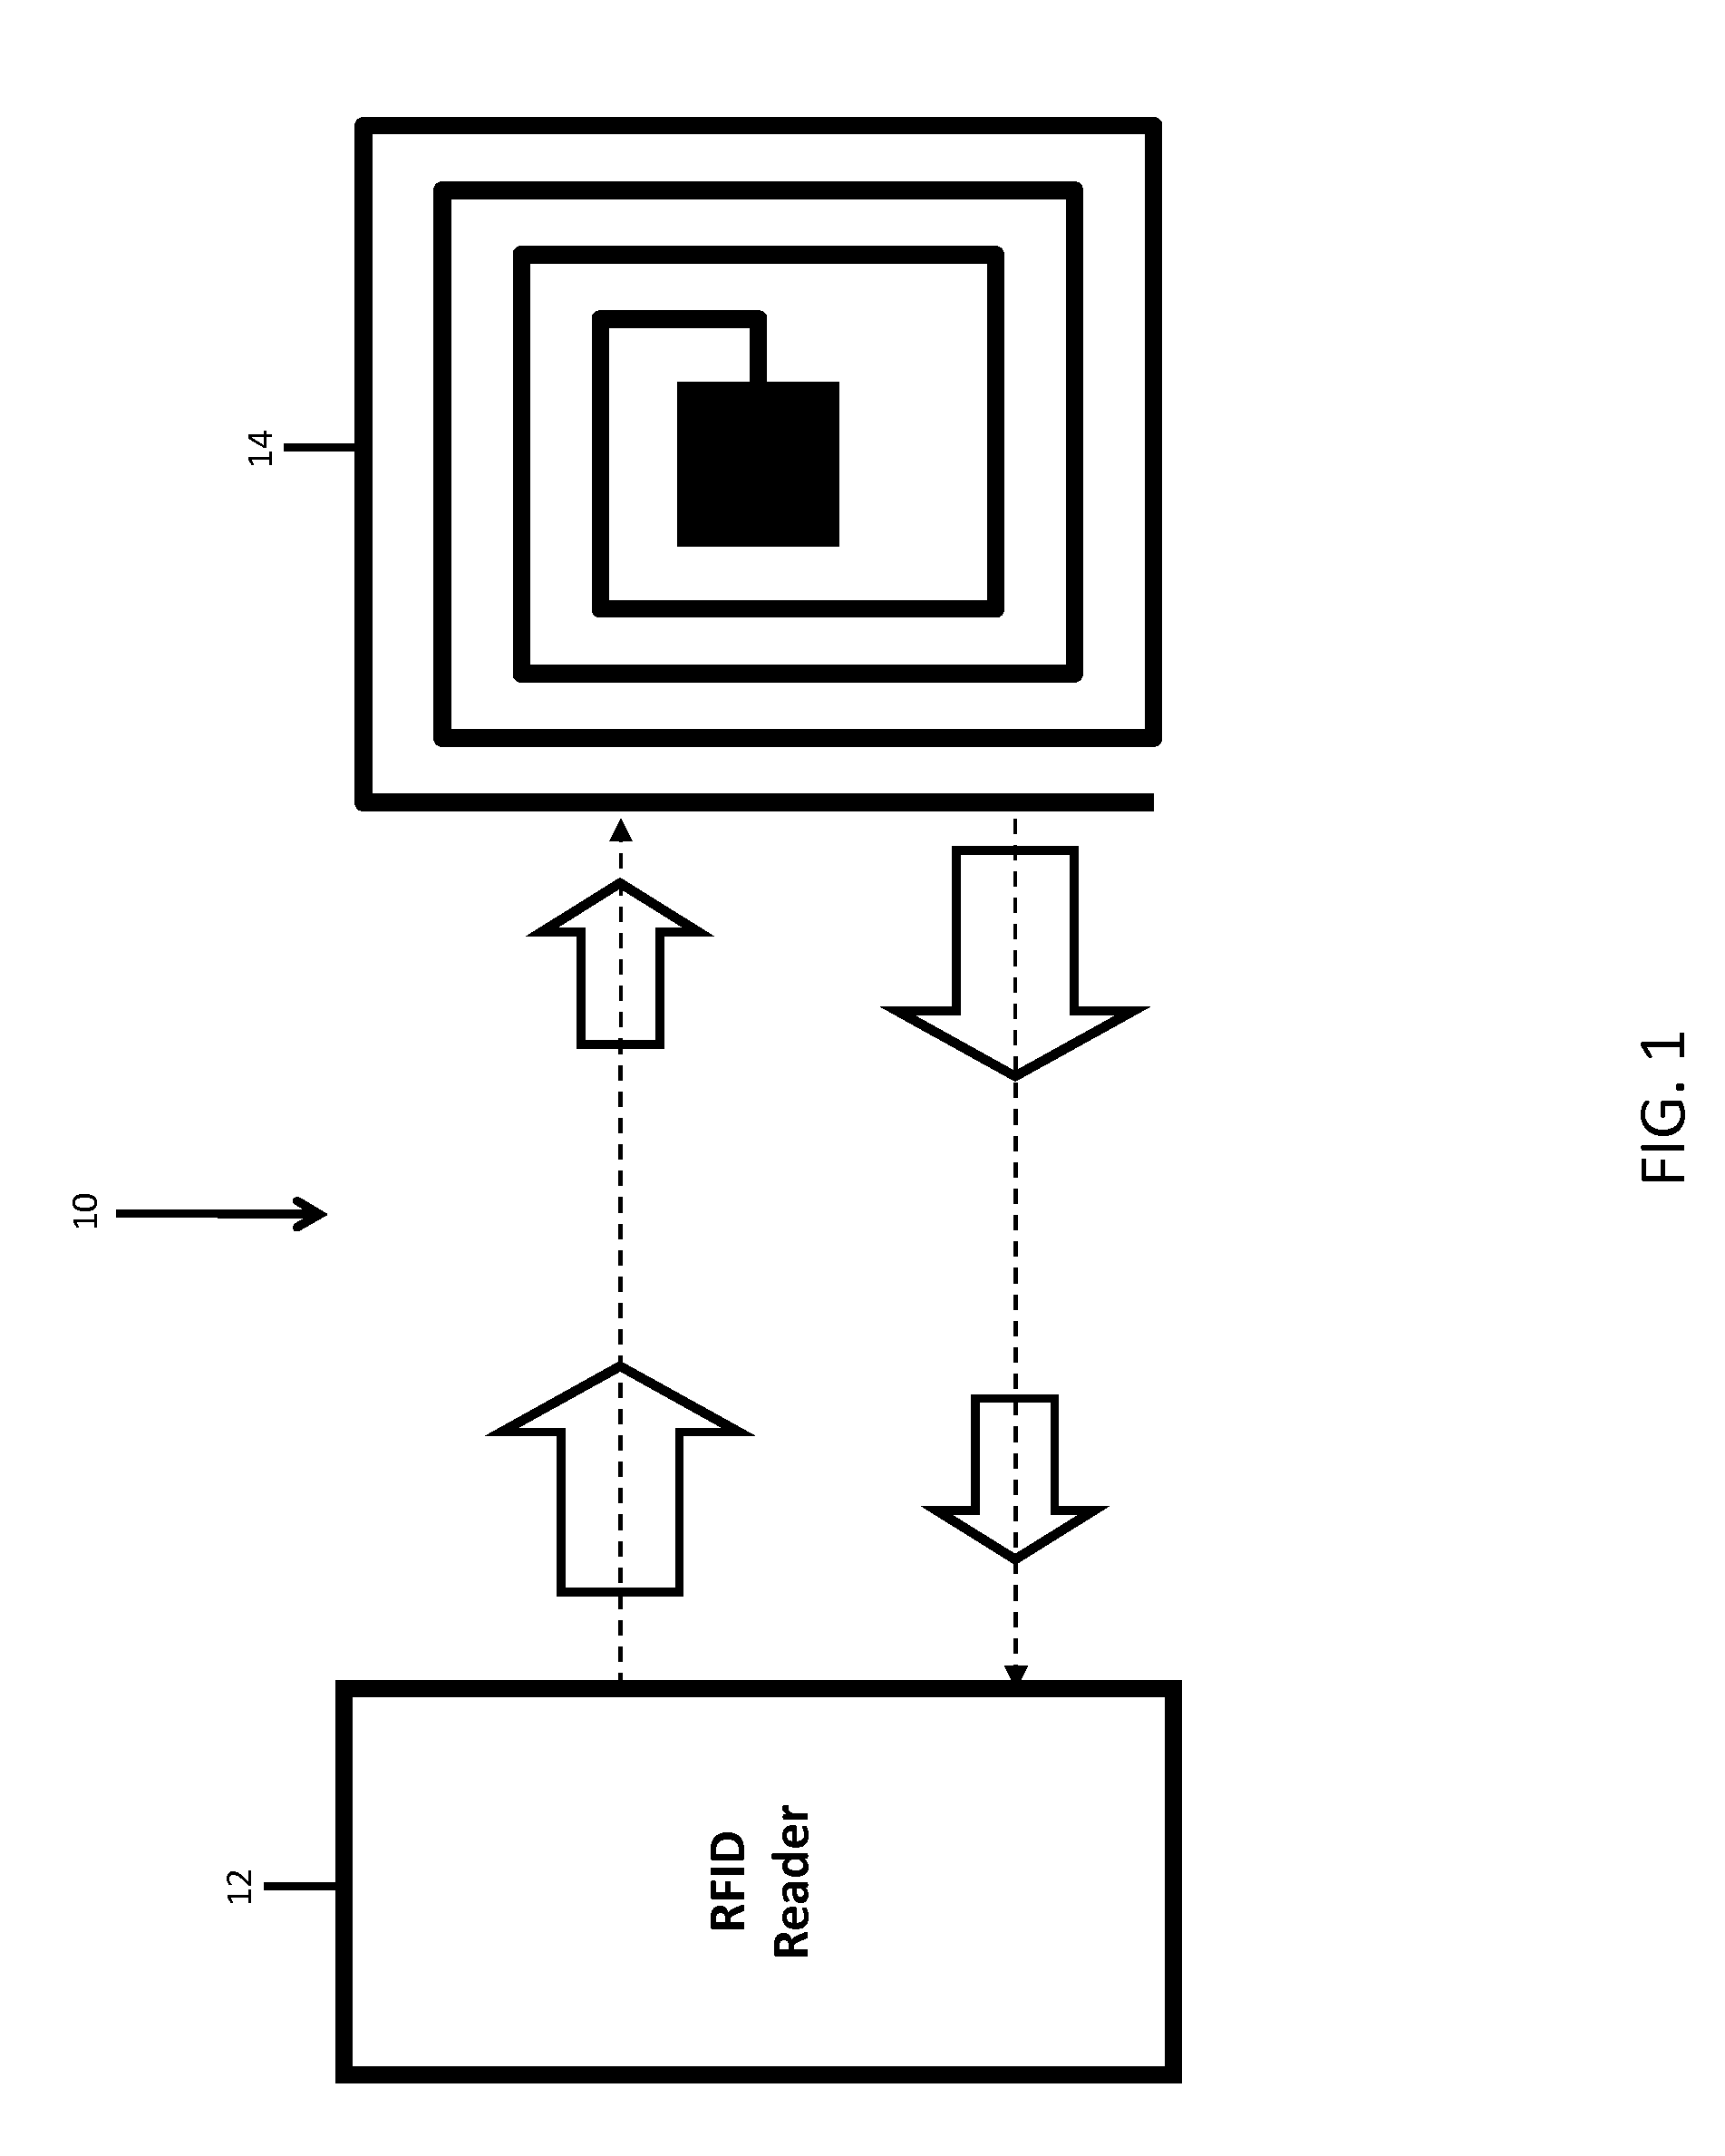 Automated card information exchange pursuant to a commercial transaction